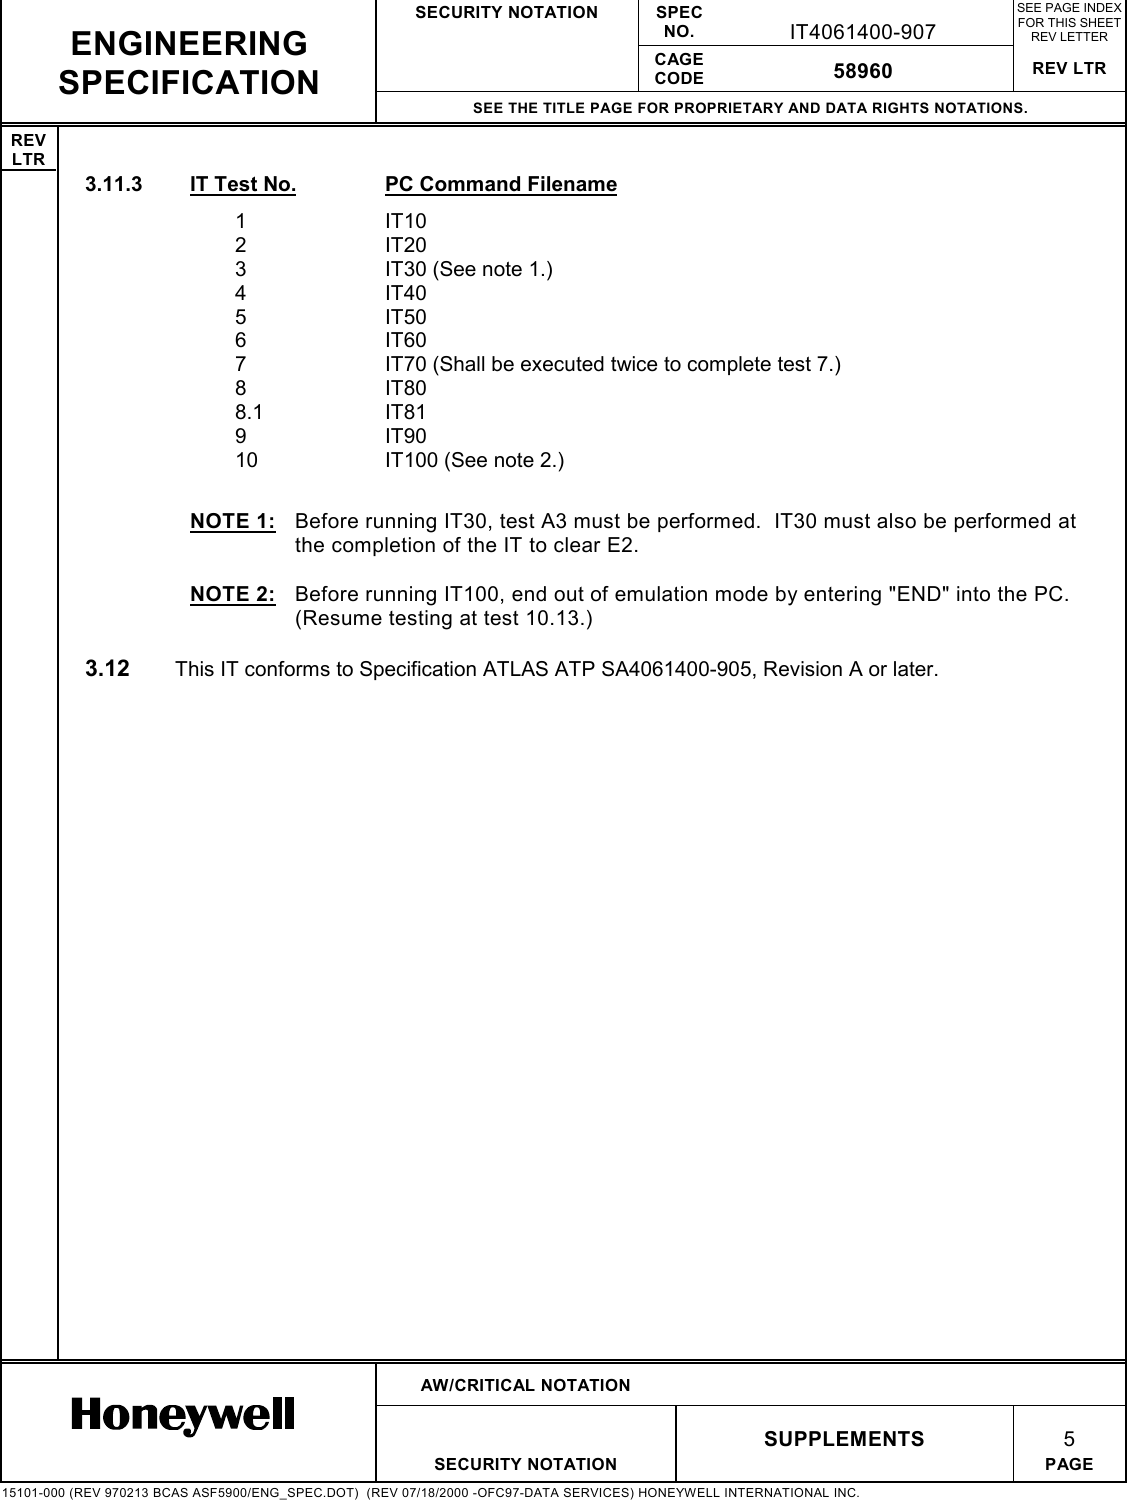 SECURITY NOTATION SPECNO. IT4061400-907SEE PAGE INDEXFOR THIS SHEETREV LETTERCAGECODE 58960 REV LTRSEE THE TITLE PAGE FOR PROPRIETARY AND DATA RIGHTS NOTATIONS.REVLTRAW/CRITICAL NOTATIONSUPPLEMENTS 5SECURITY NOTATION PAGE15101-000 (REV 970213 BCAS ASF5900/ENG_SPEC.DOT)  (REV 07/18/2000 -OFC97-DATA SERVICES) HONEYWELL INTERNATIONAL INC.ENGINEERINGSPECIFICATION3.11.3  IT Test No. PC Command Filename1IT102IT203 IT30 (See note 1.)4IT405IT506IT607 IT70 (Shall be executed twice to complete test 7.)8IT808.1 IT819IT9010 IT100 (See note 2.)NOTE 1:  Before running IT30, test A3 must be performed.  IT30 must also be performed atthe completion of the IT to clear E2.NOTE 2:  Before running IT100, end out of emulation mode by entering &quot;END&quot; into the PC.(Resume testing at test 10.13.)3.12  This IT conforms to Specification ATLAS ATP SA4061400-905, Revision A or later.